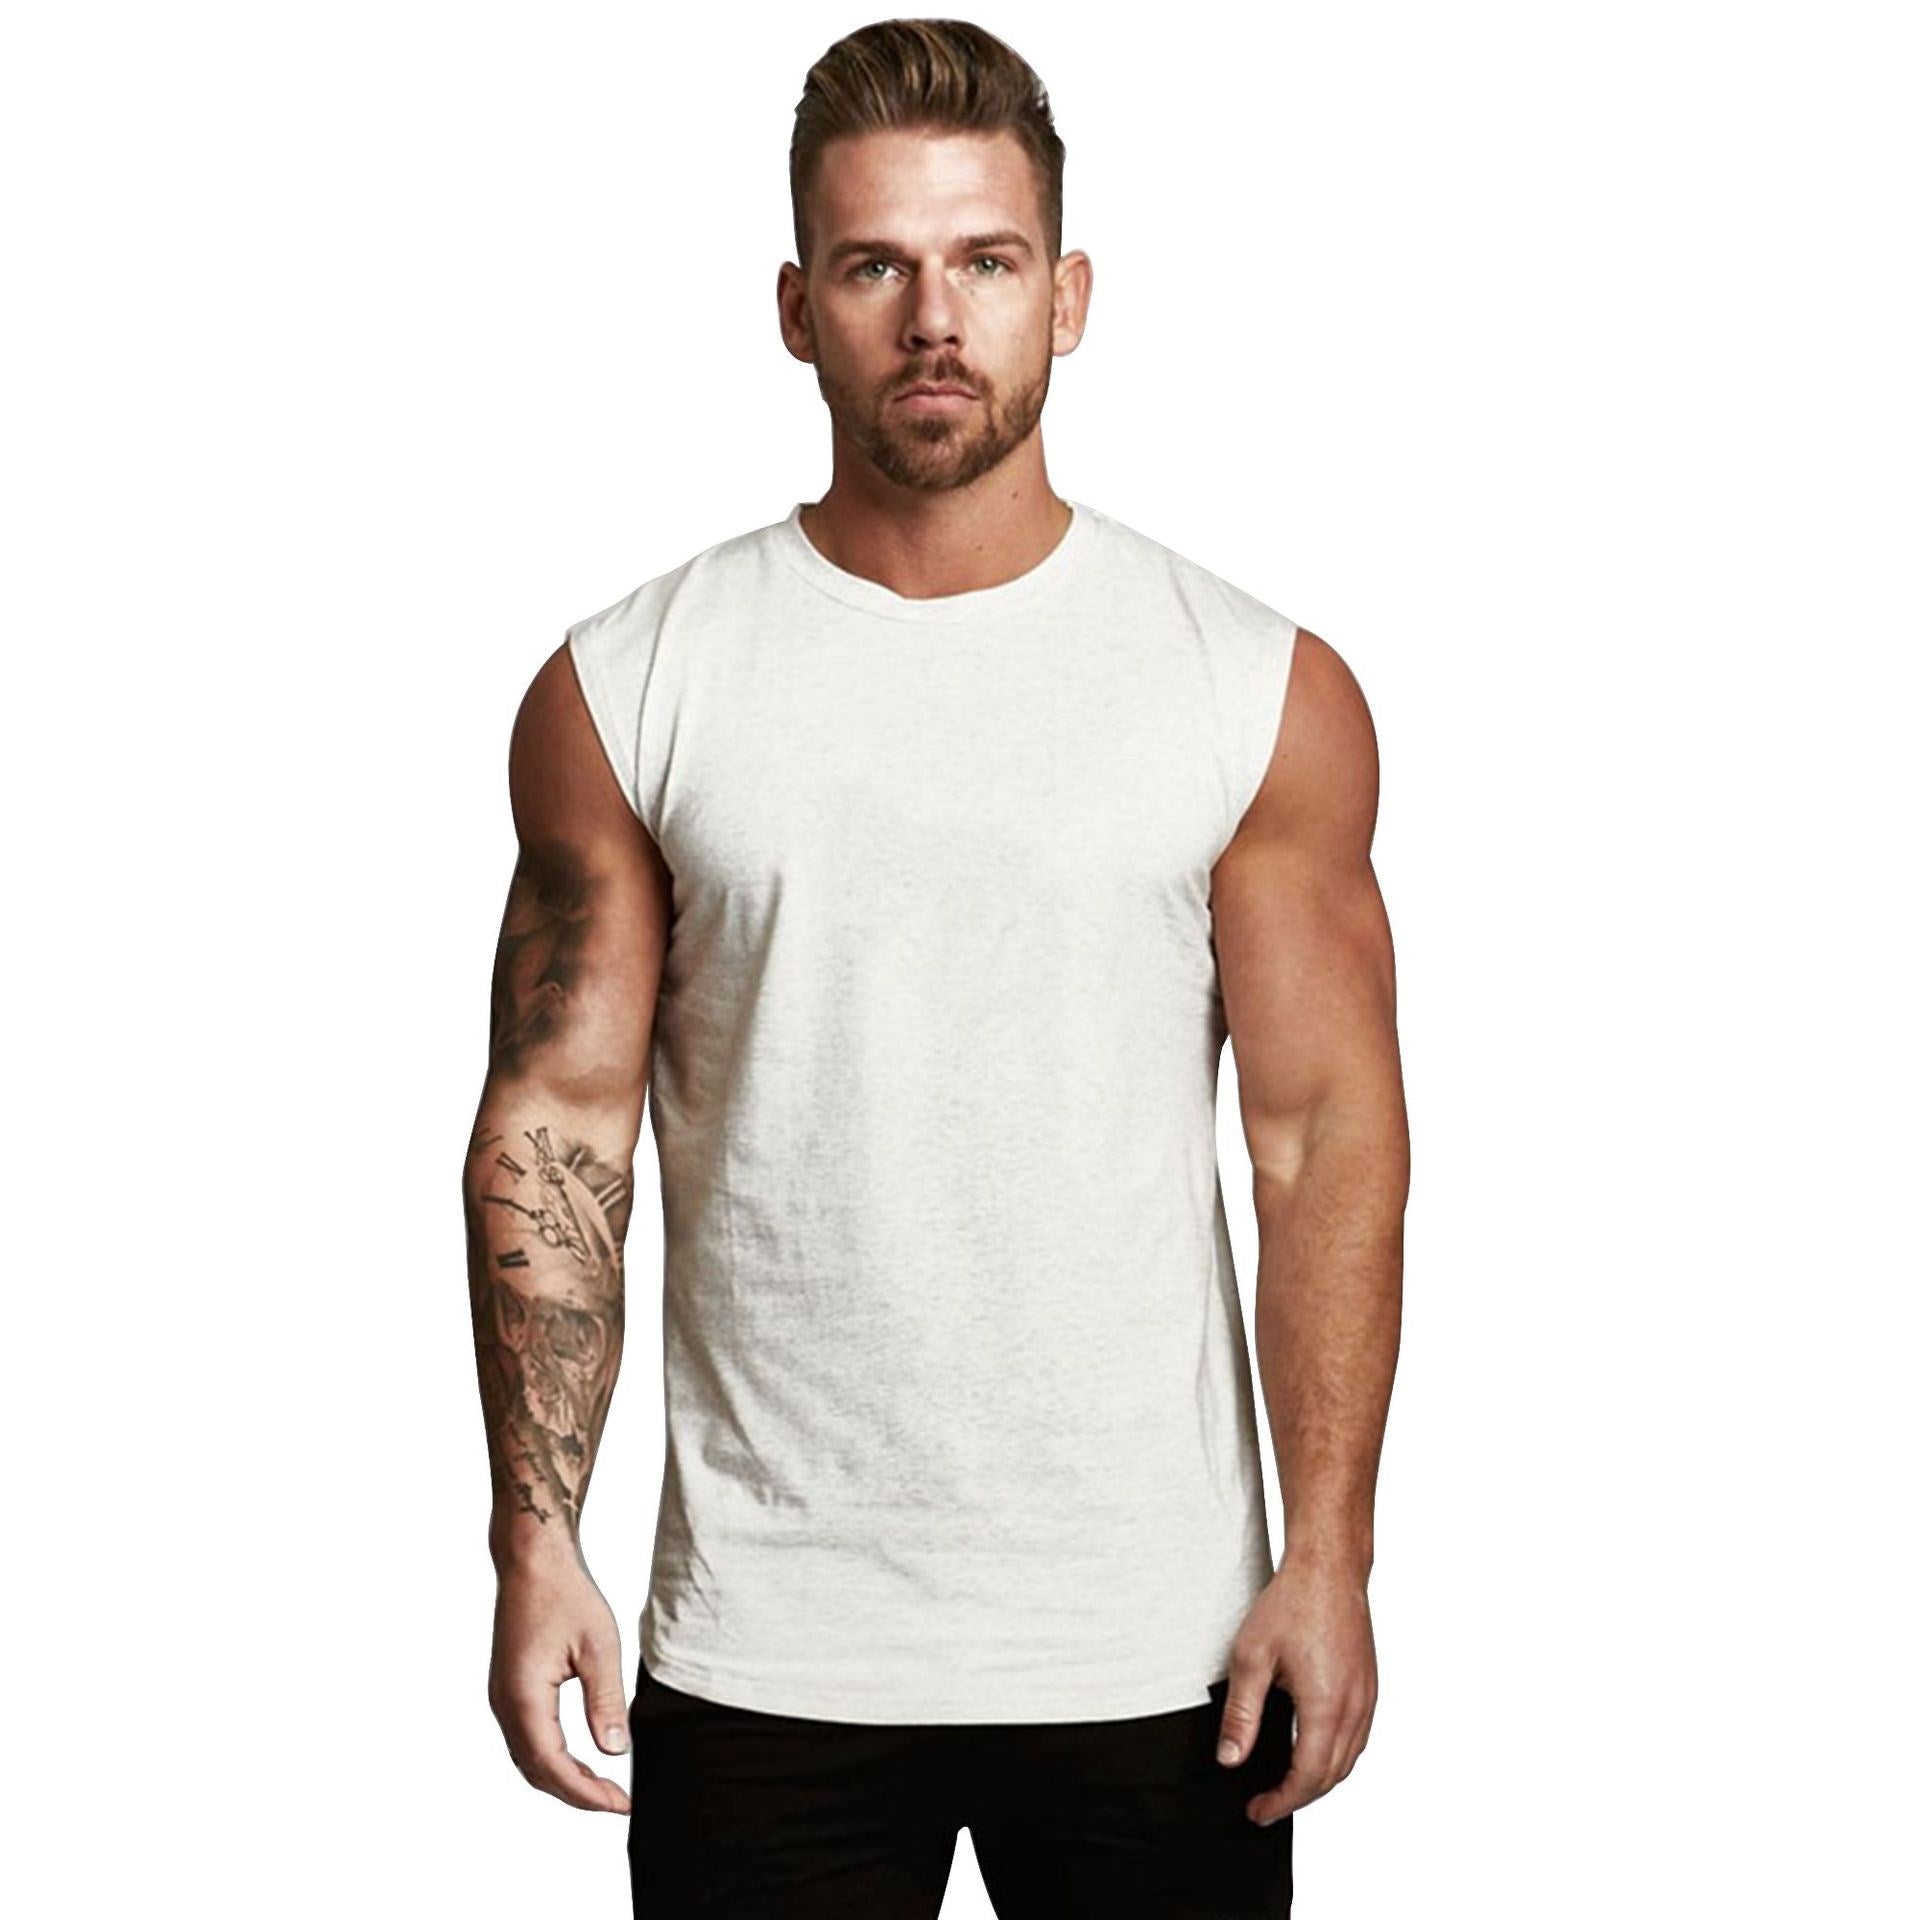 Fitness vest sports and leisure